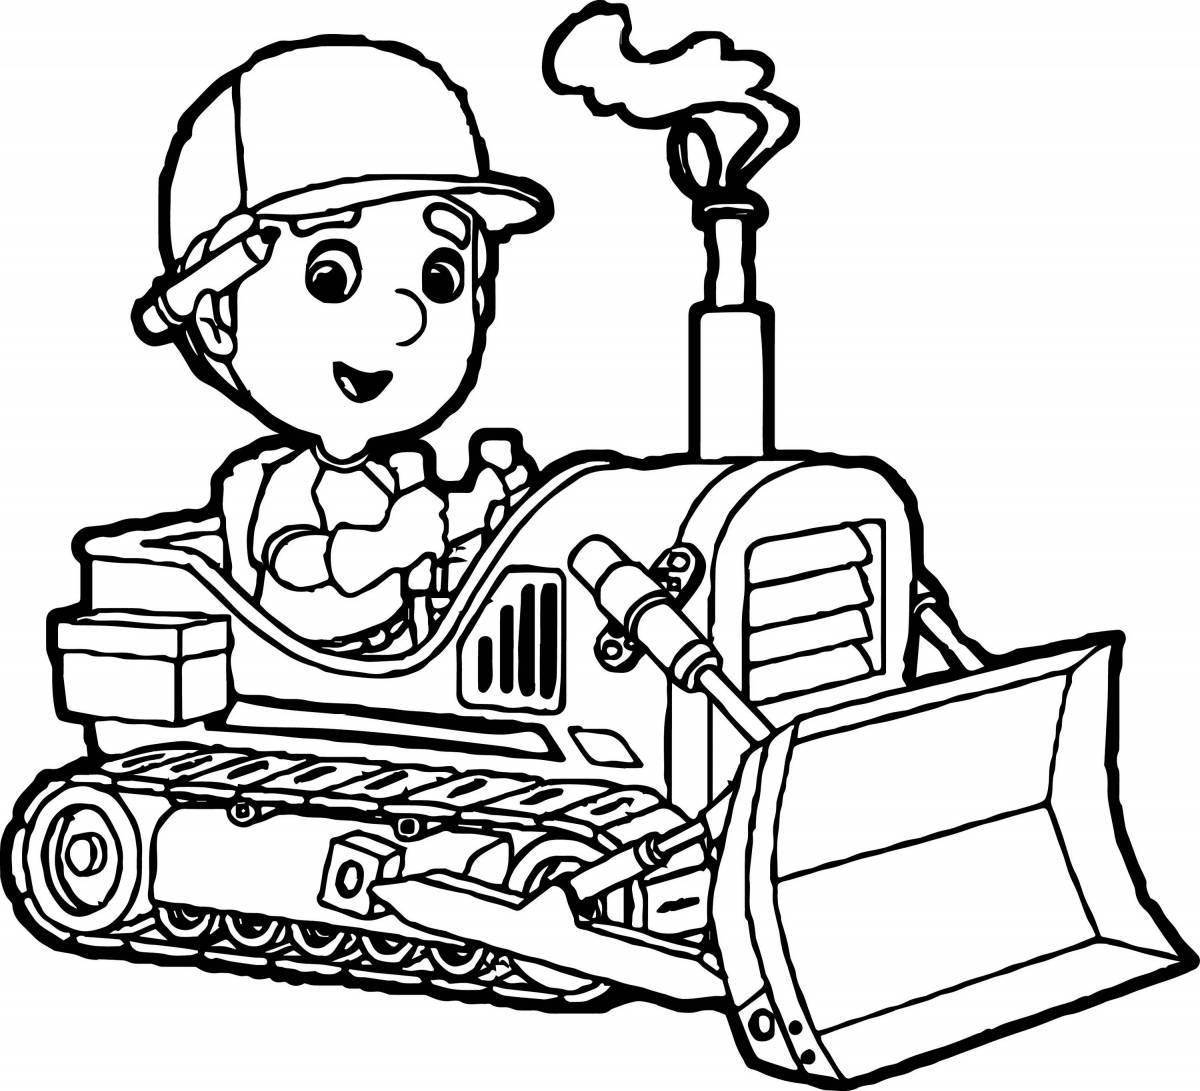 Coloring page brave driver